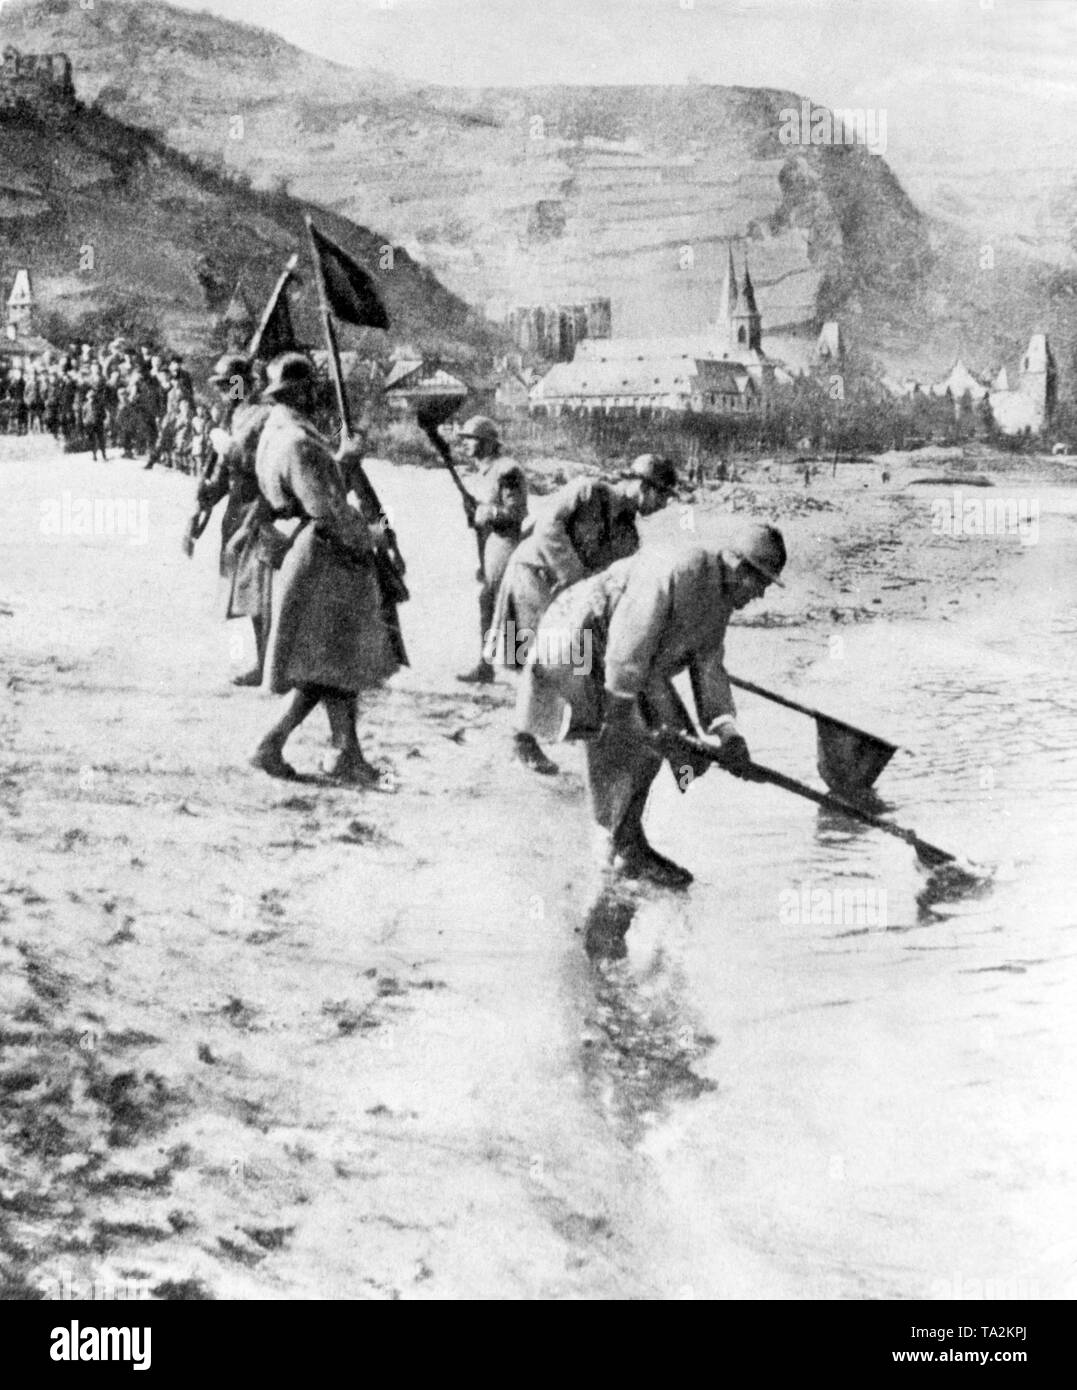 Shortly before their withdrawal from the Rhineland, these French soldiers submerged their flags and regimental pennants into the waters of the Rhine to symbolically document their claim to the river. Stock Photo